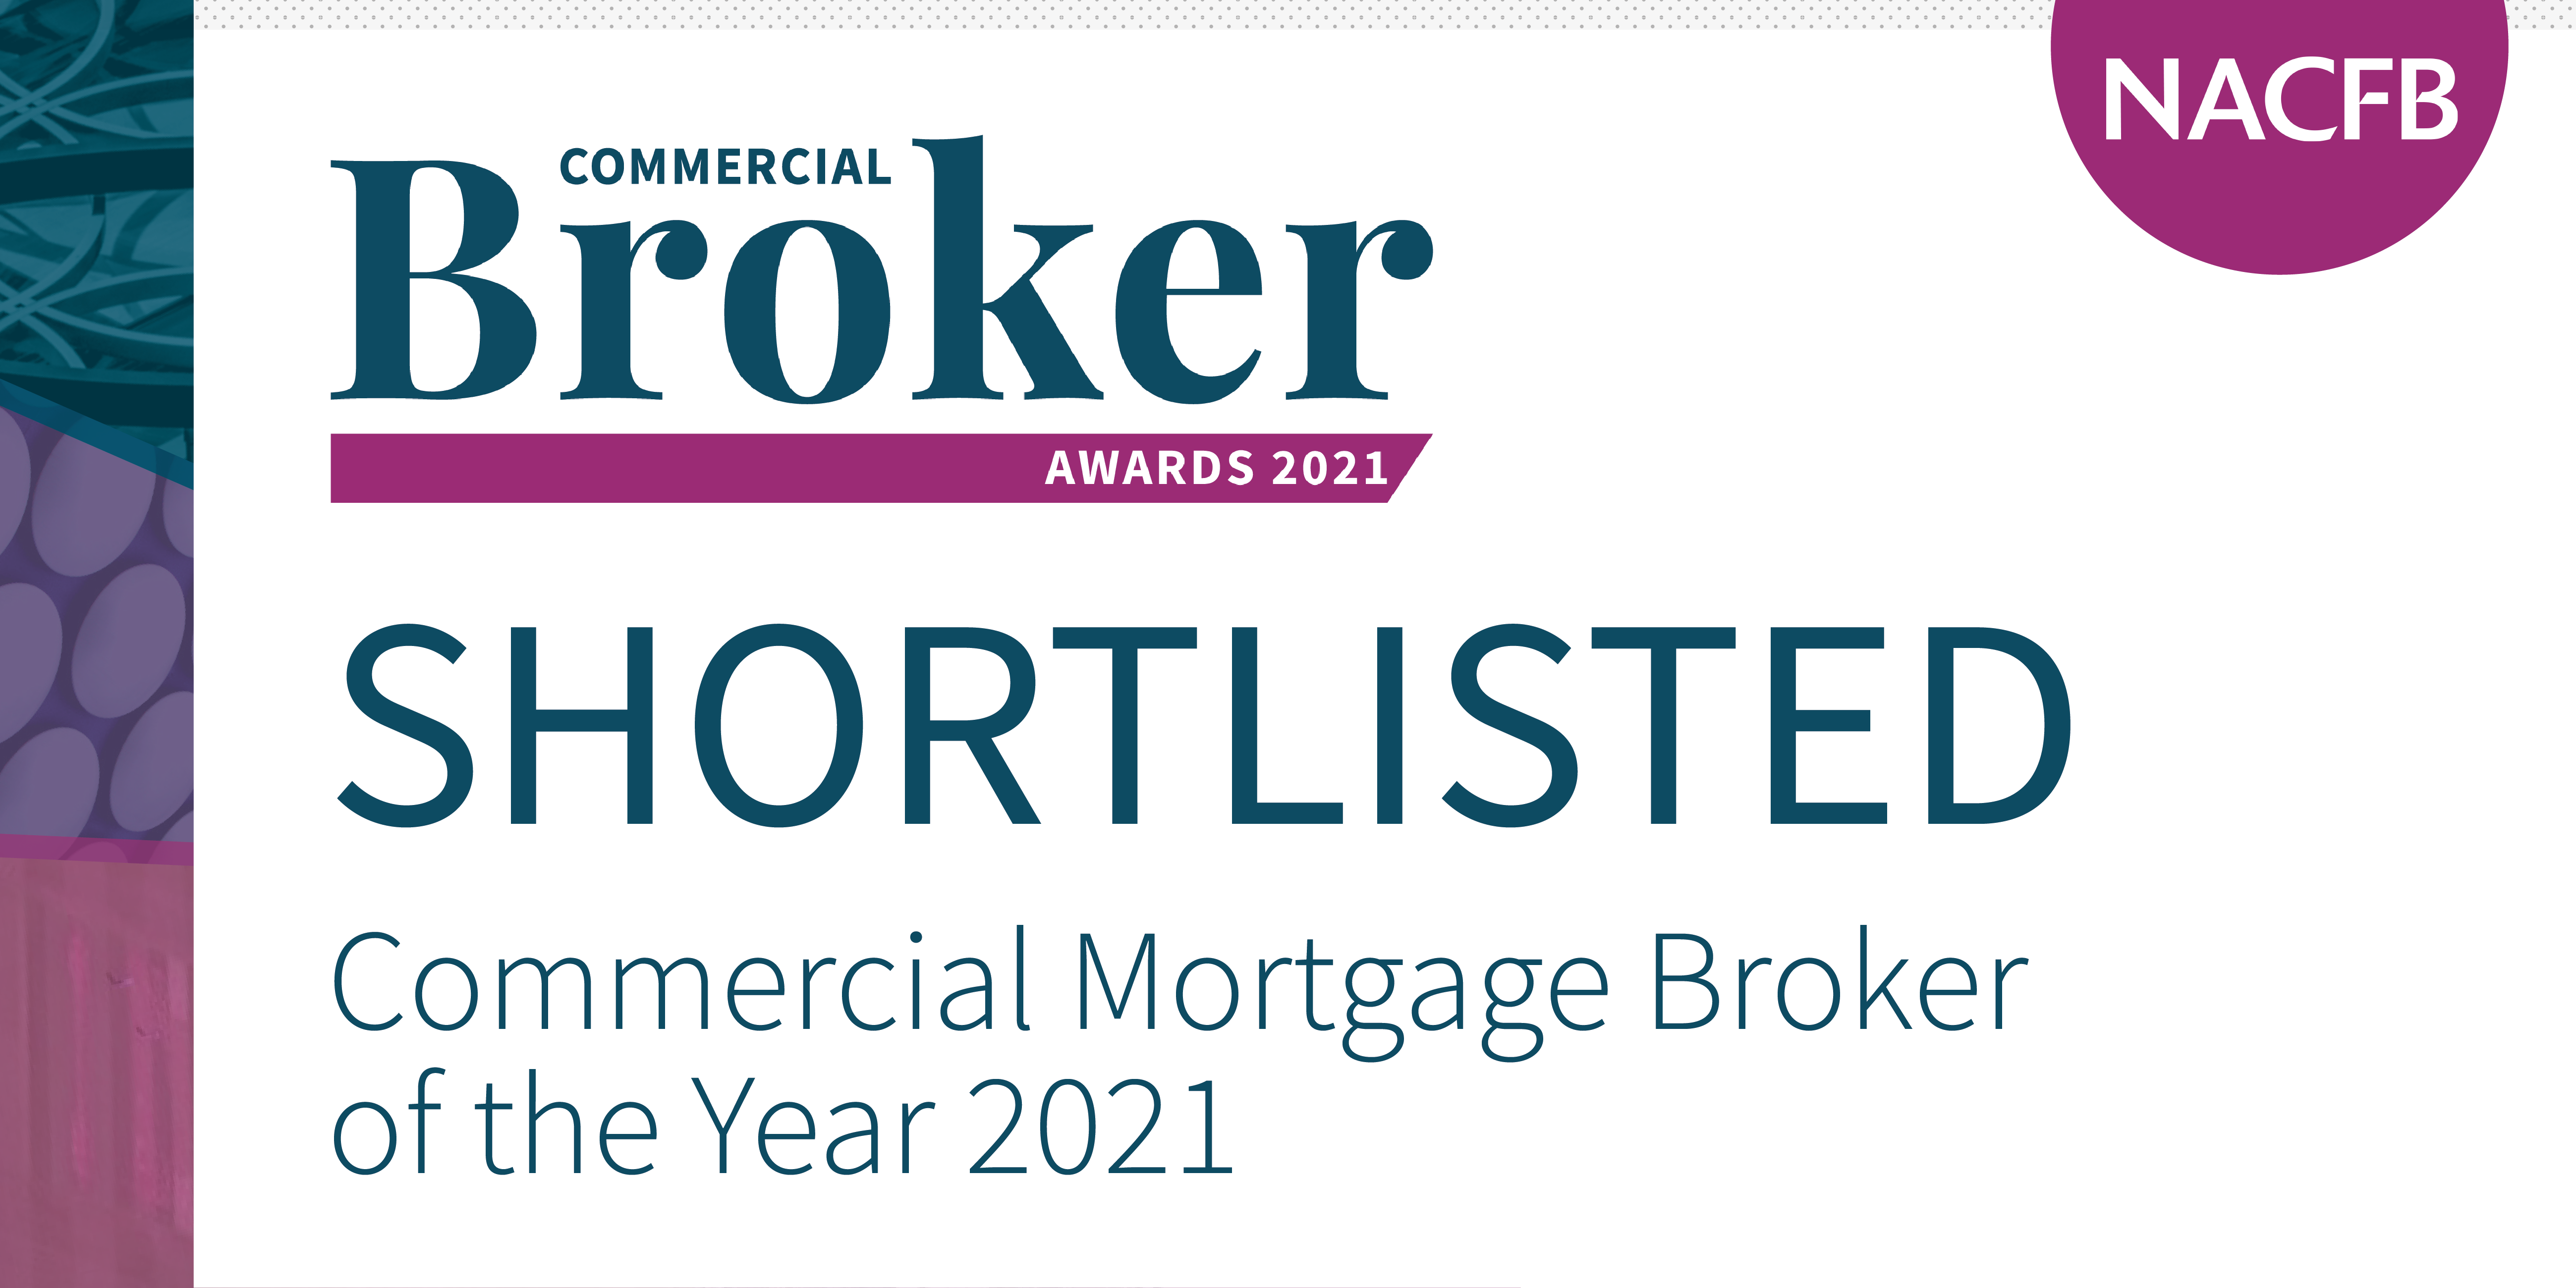 NACFB 2021 Awards Shortlist - Commercial Broker of the Year